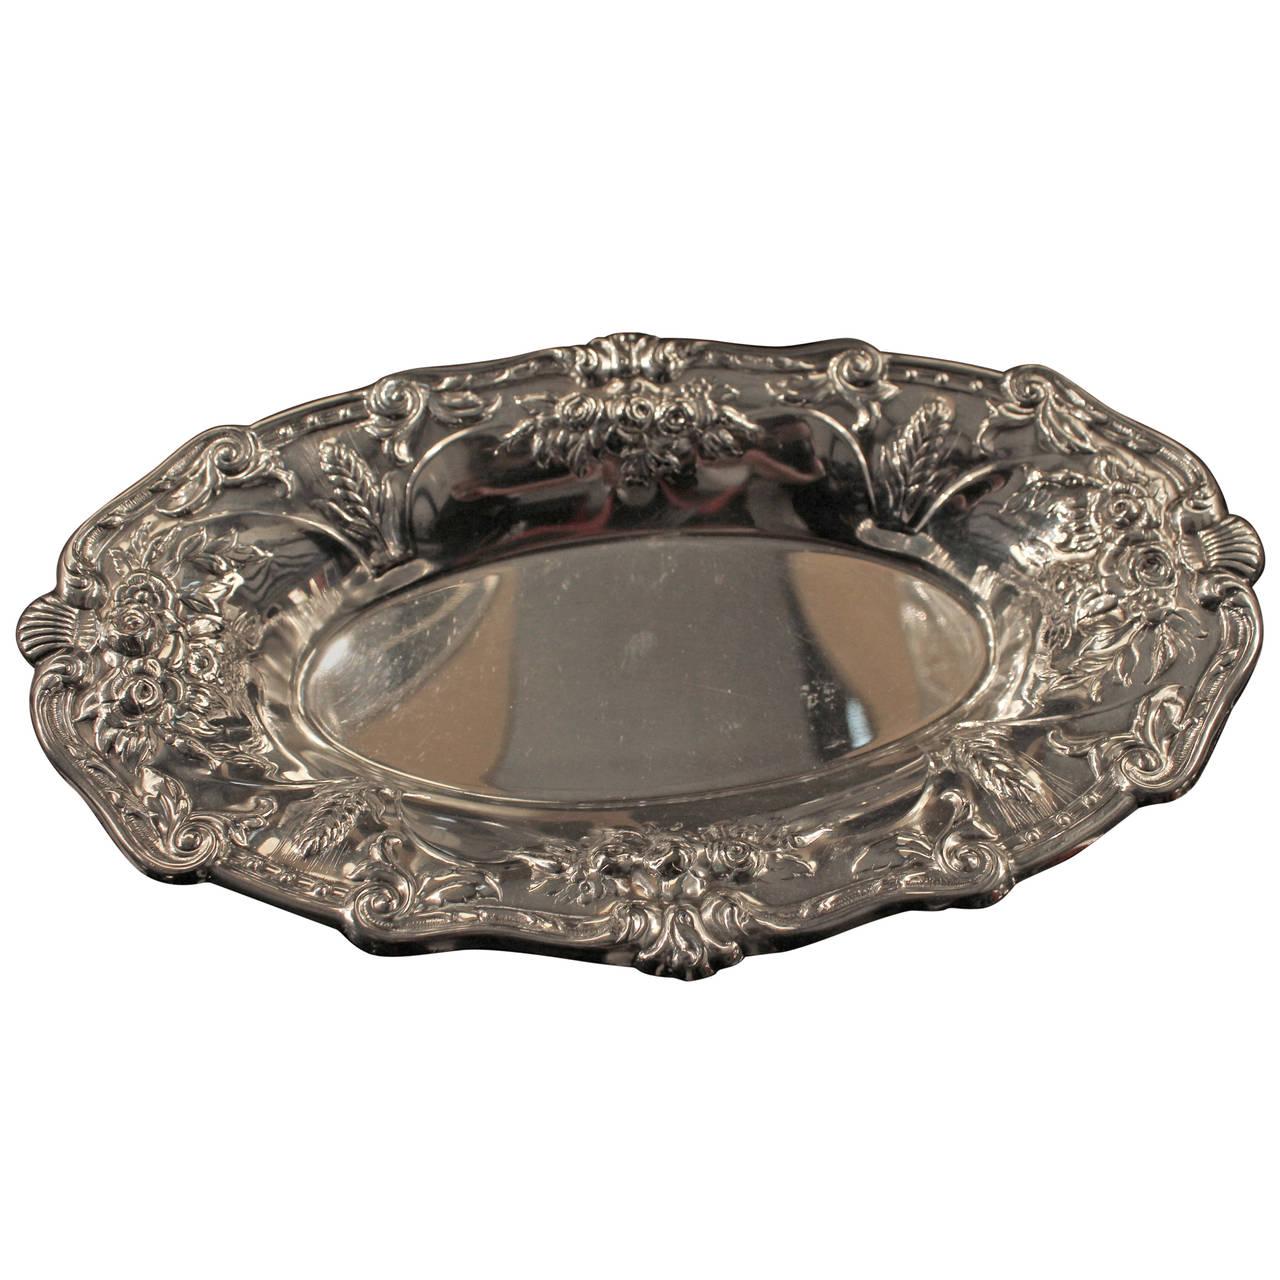 Beautifully Detailed Engraved Federal Silver Company Oval Plate, circa 1900 im Zustand „Hervorragend“ im Angebot in Southampton, NY